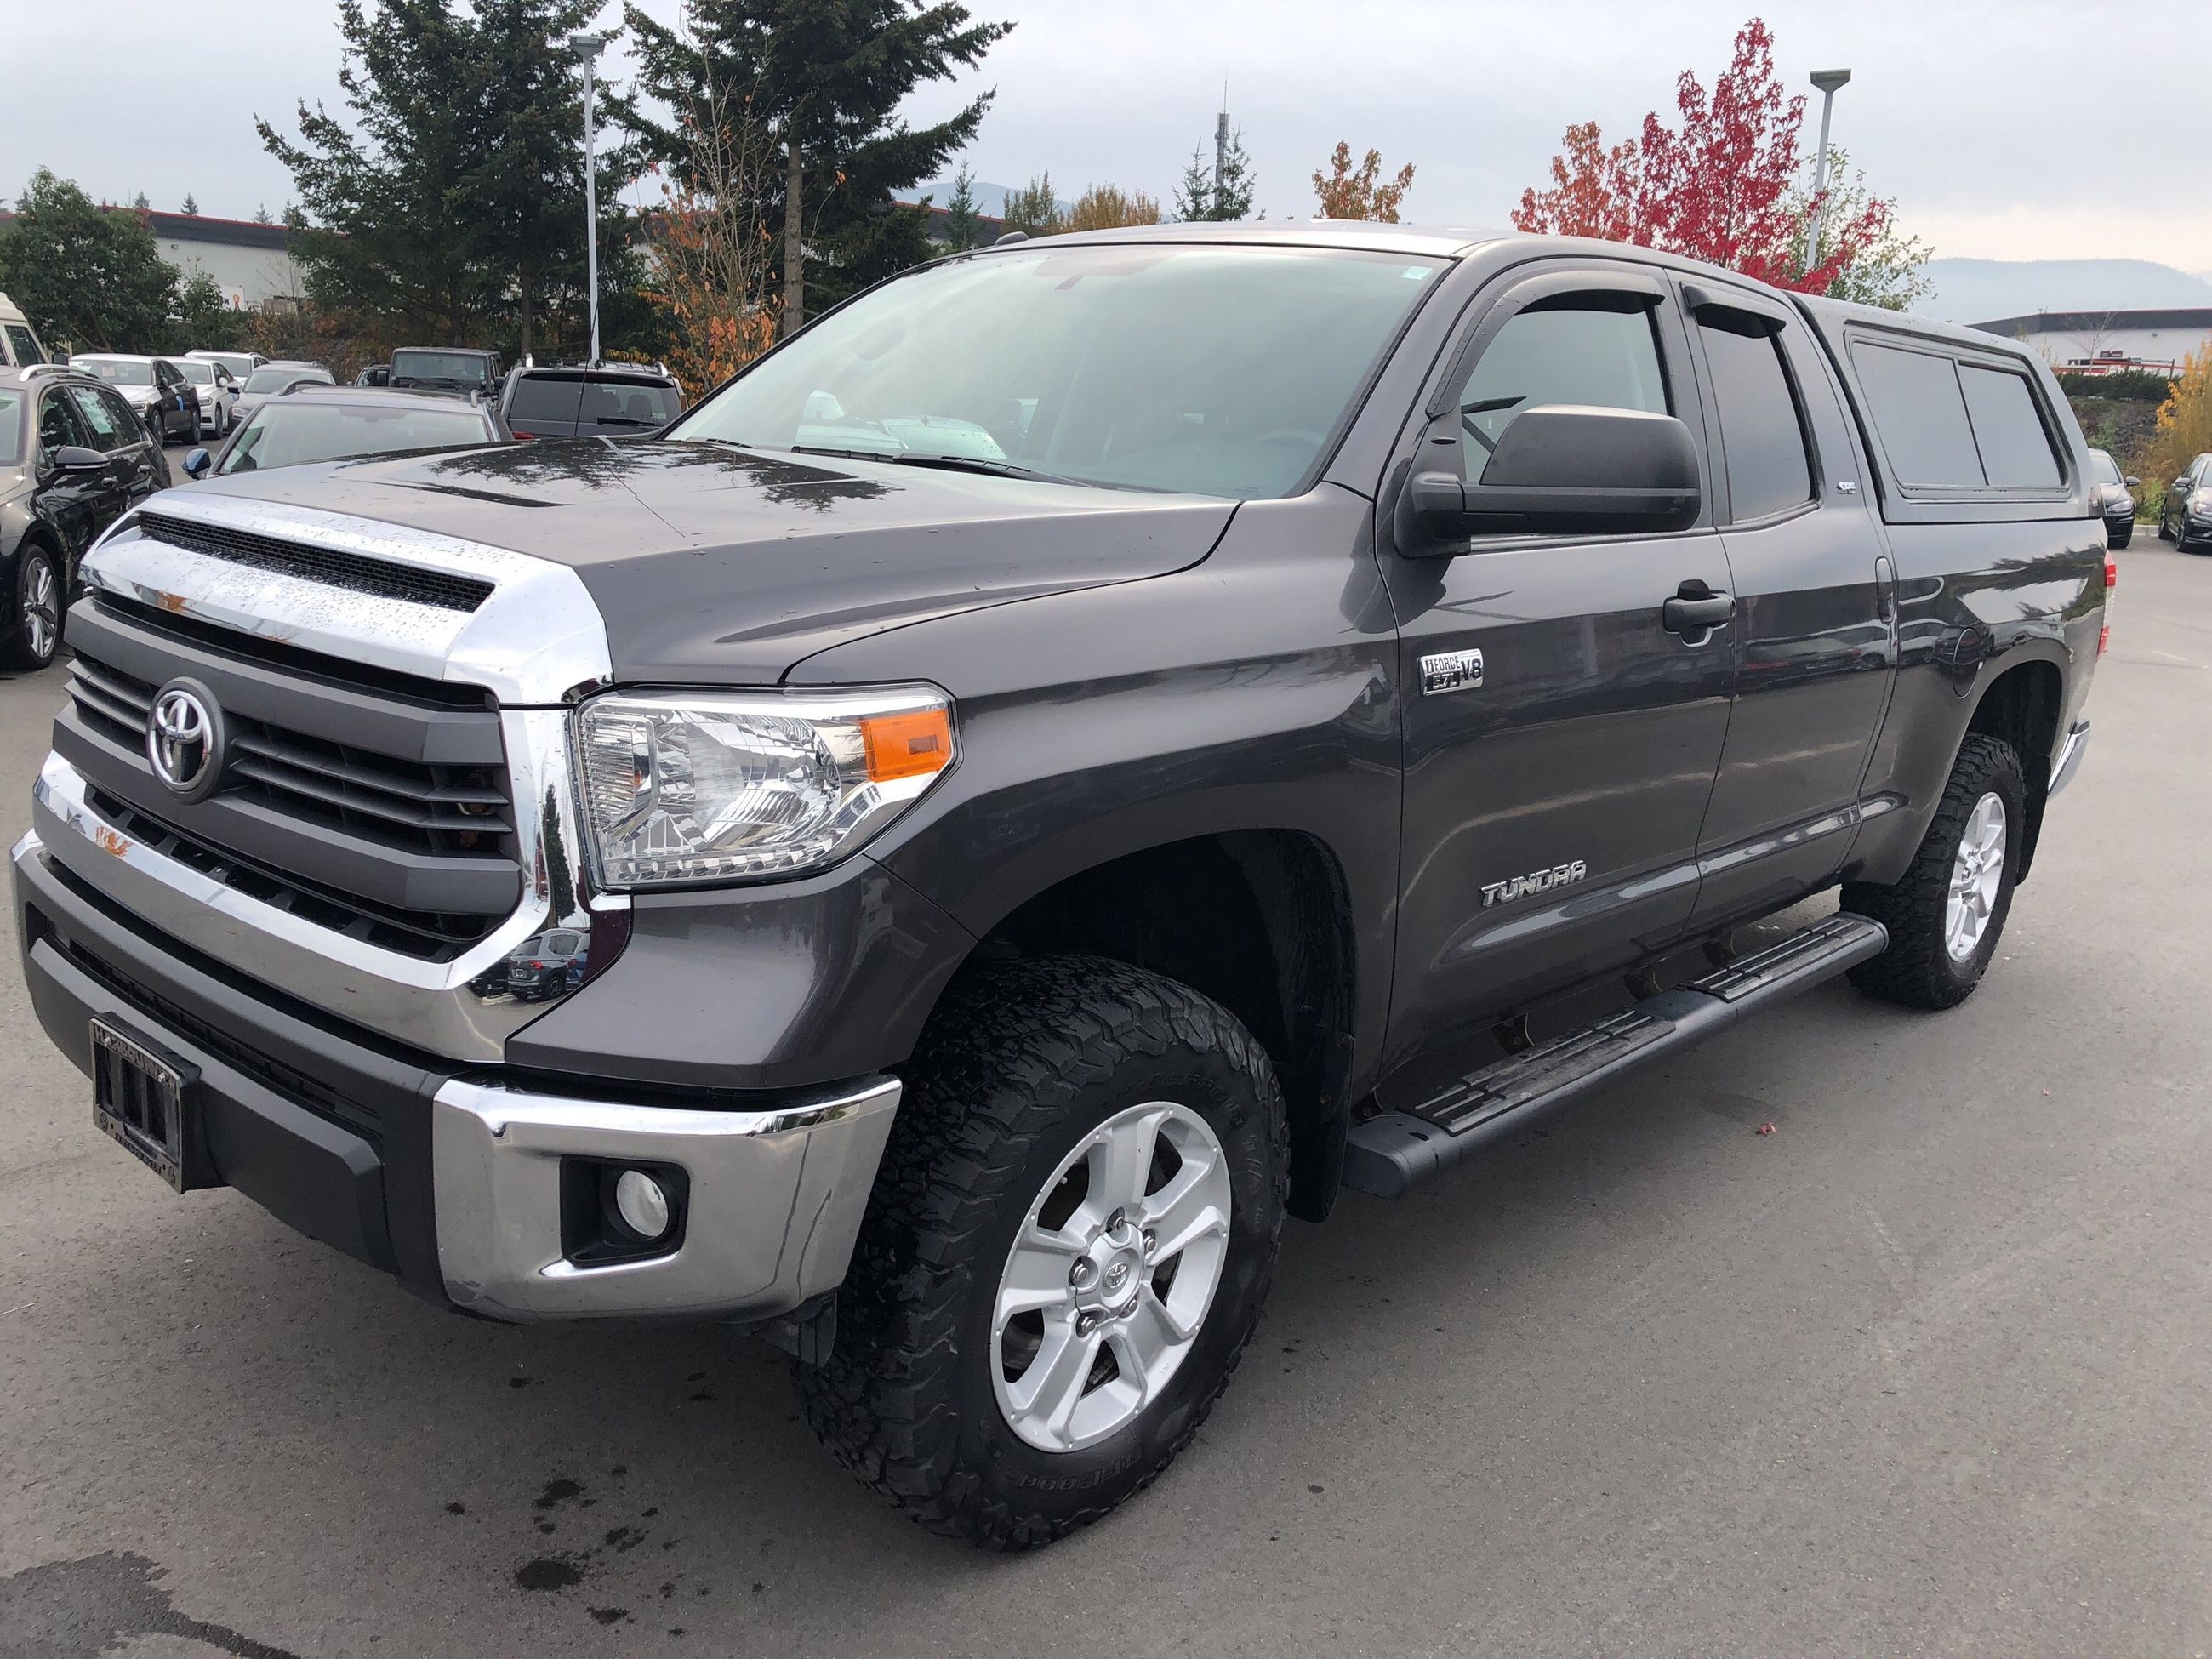 Used 2014 Toyota Tundra CREWMAX SR5 for Sale - $29995 | Harbourview VW